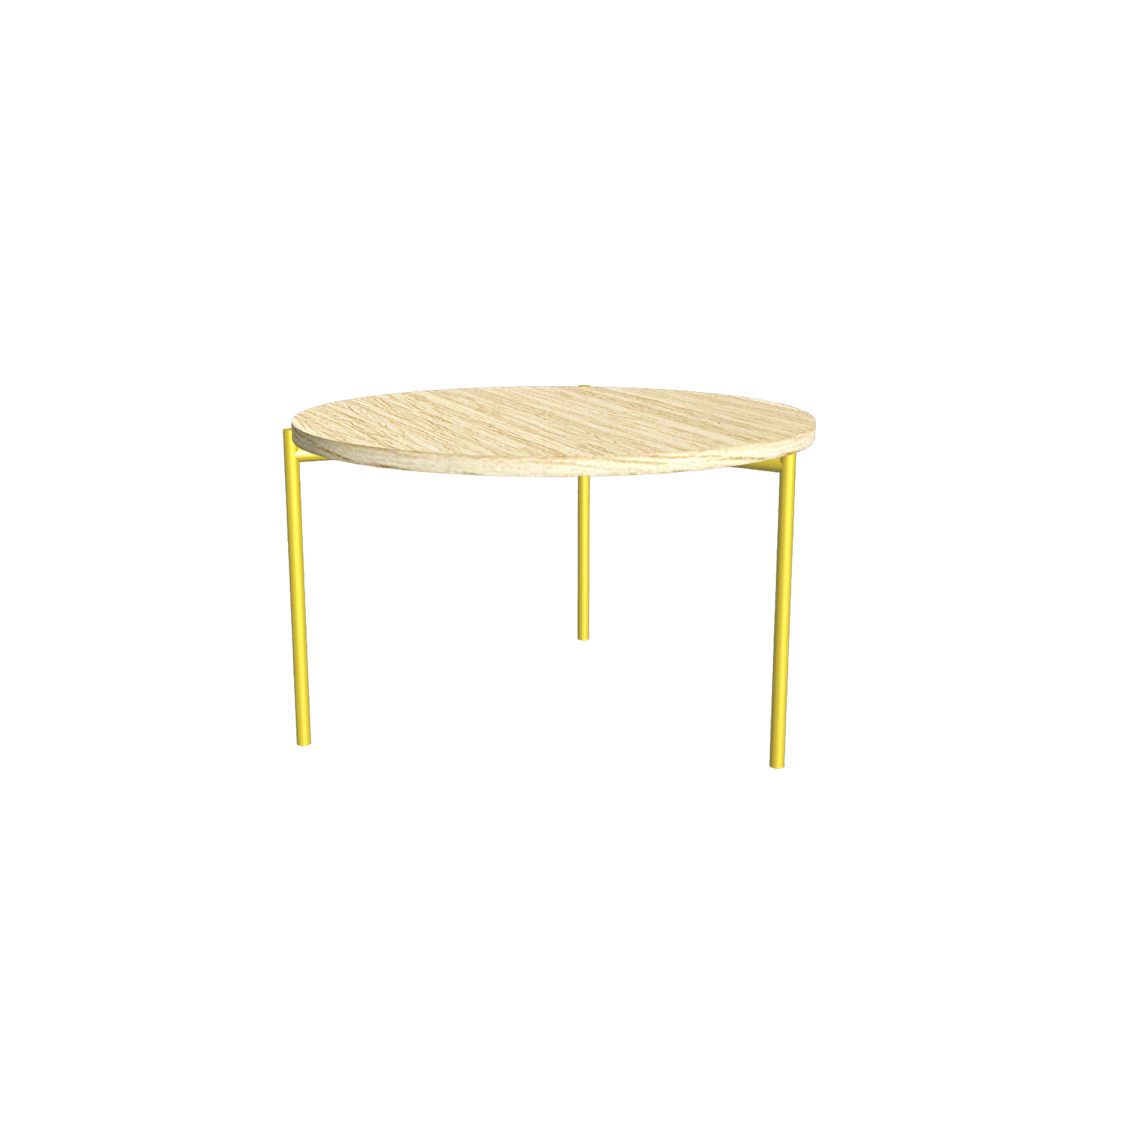 COFFEE TABLE, ROUND, SMALL - Customer's Product with price 2400.00 ID -ly8wm8RVC4oW6BU-fXa3L6S